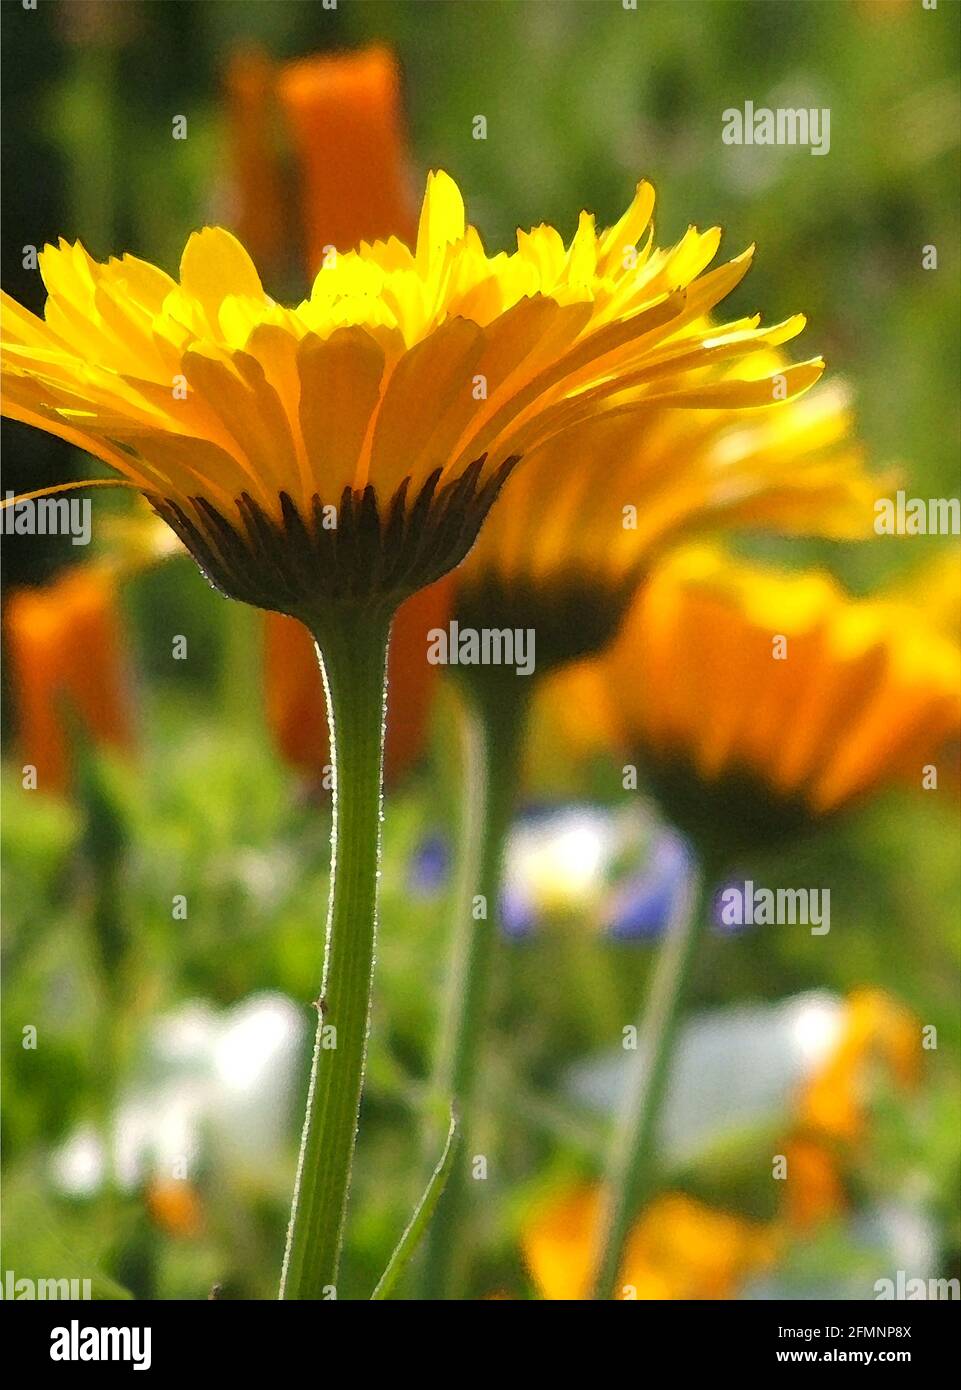 Pot Marigold (Calendula officinalis) One of Forty-two Iconic Images of English Garden Flowers, Wildflowers and Rural Landscapes. Stock Photo